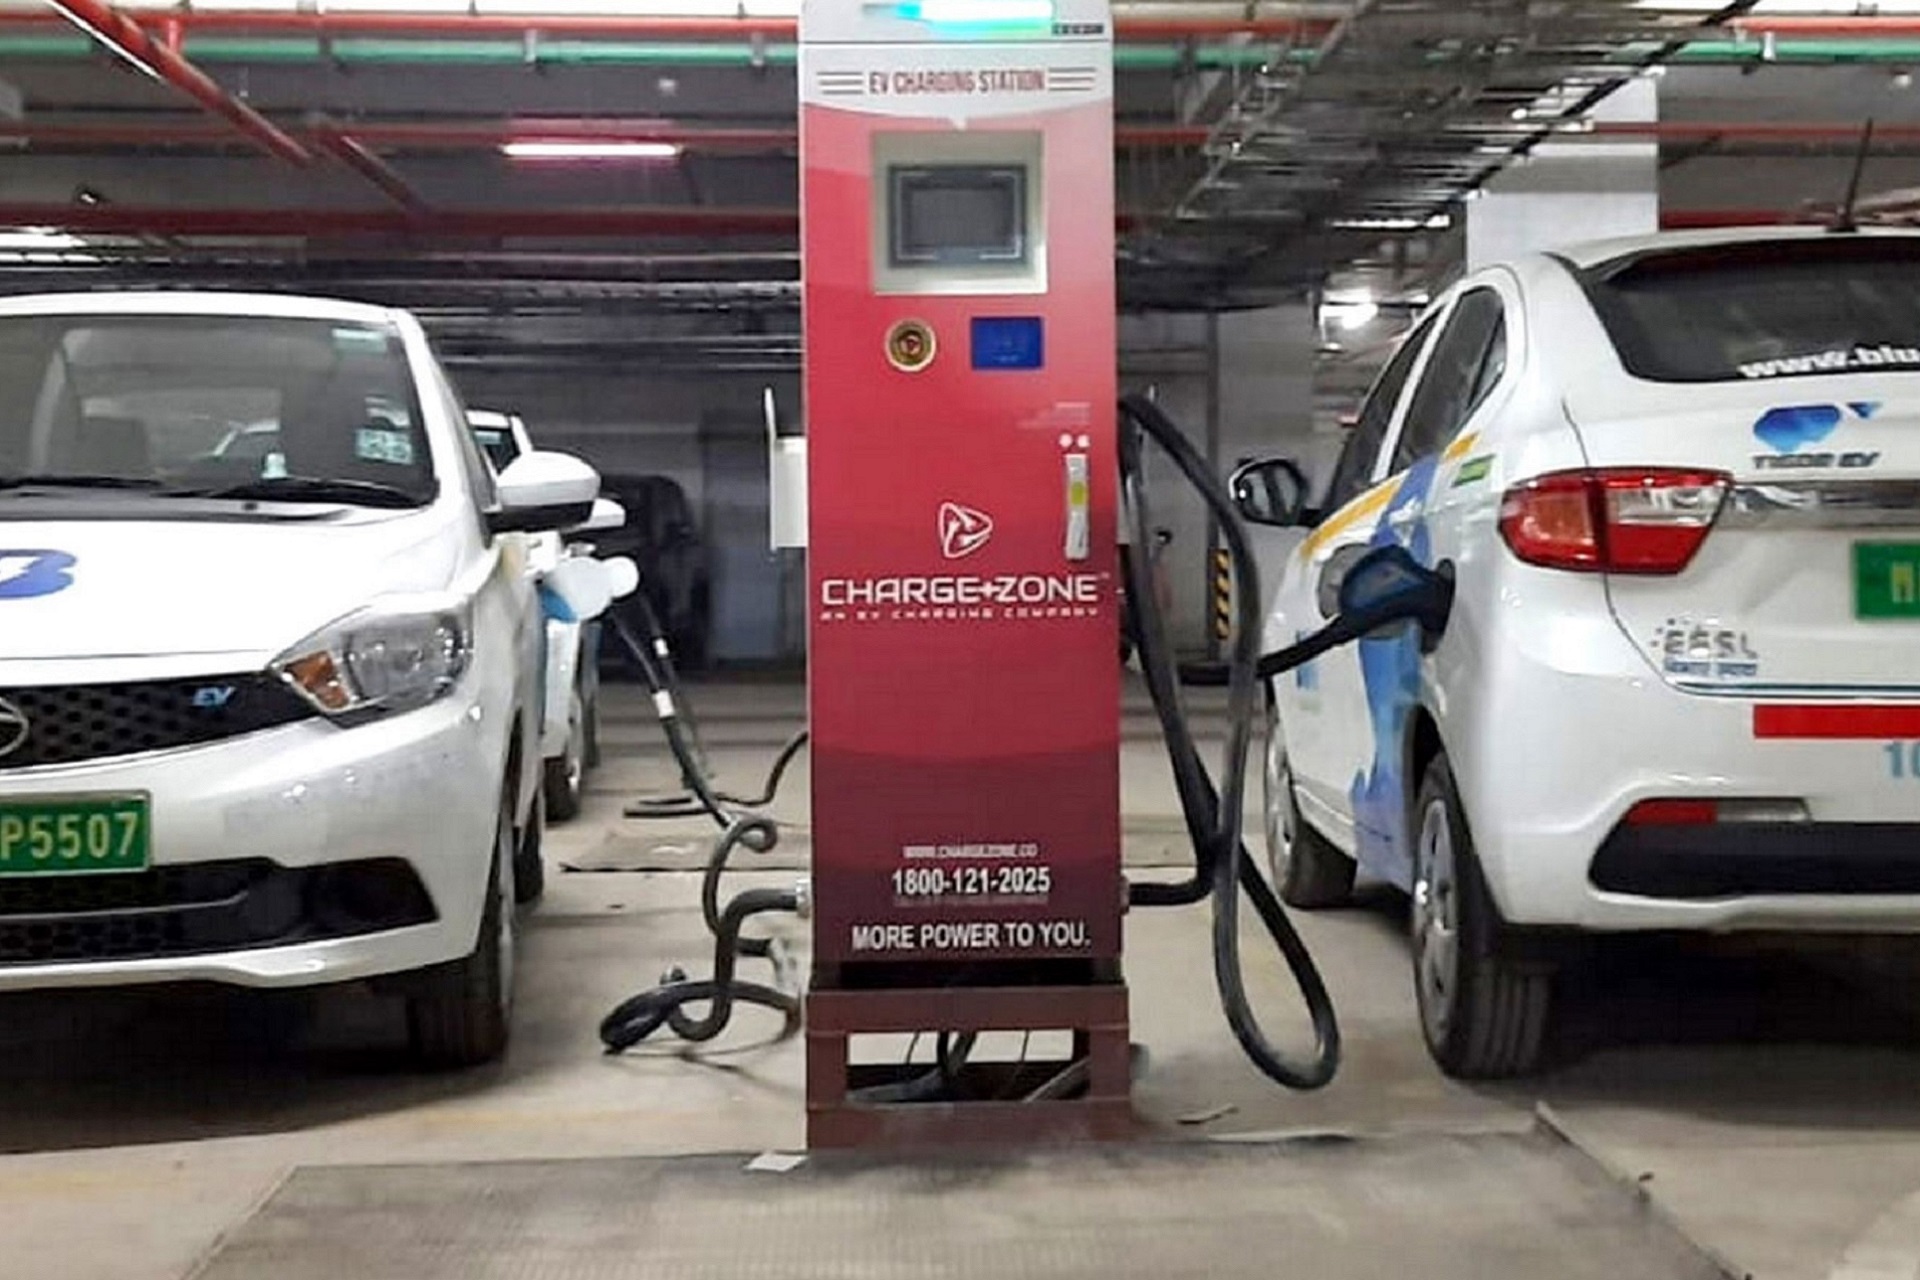 Find Out How Charge+Zone Is Winning In The EV Space